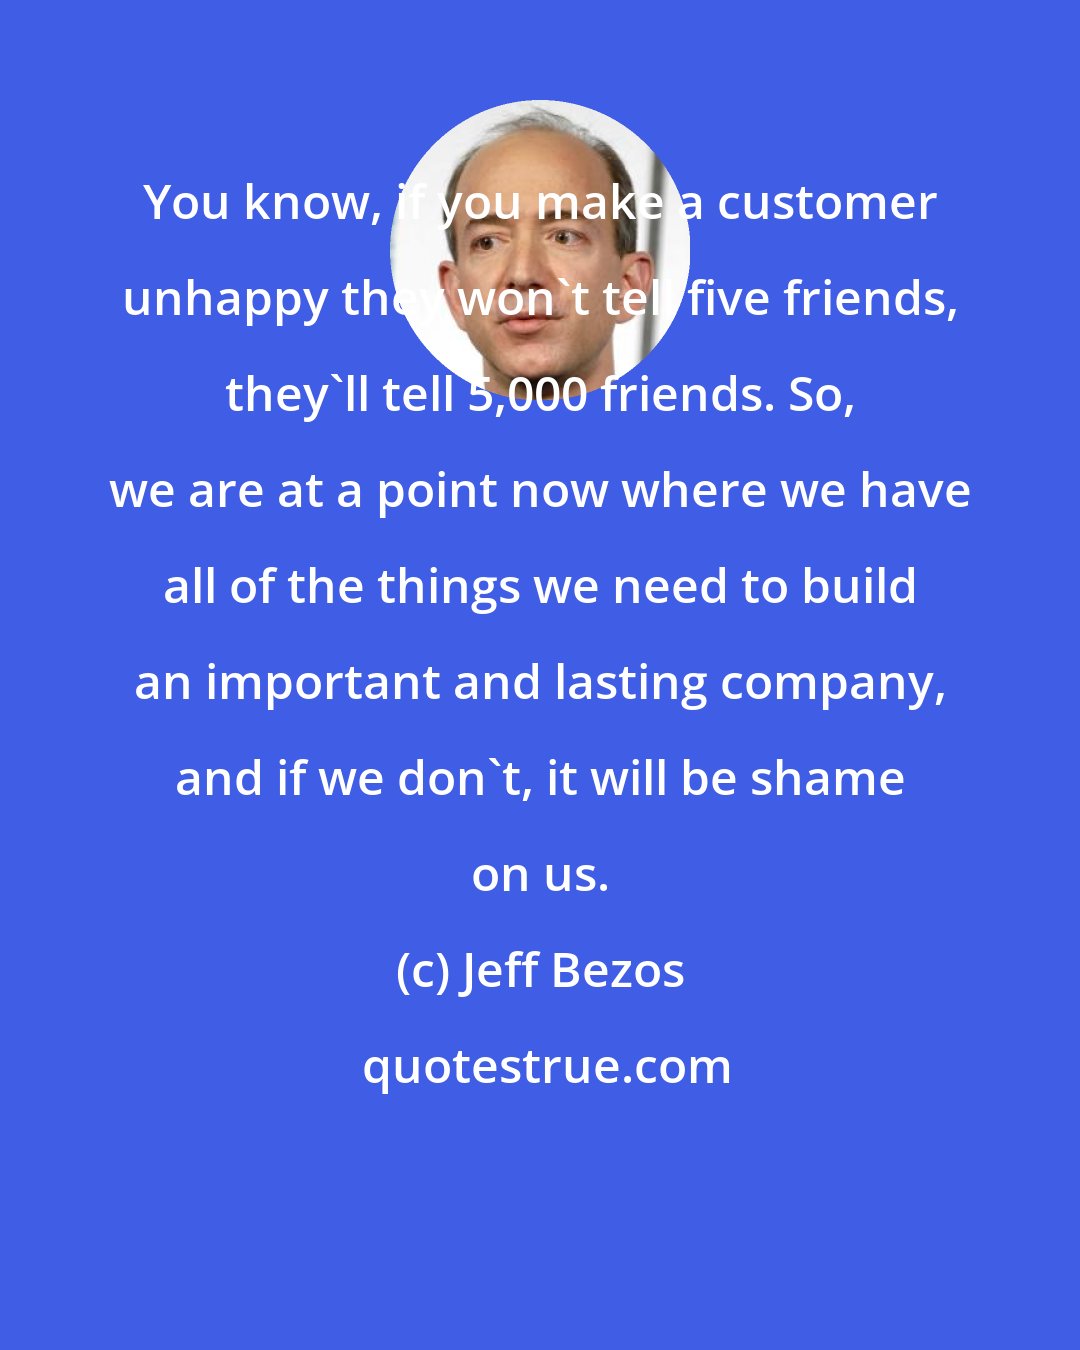 Jeff Bezos: You know, if you make a customer unhappy they won't tell five friends, they'll tell 5,000 friends. So, we are at a point now where we have all of the things we need to build an important and lasting company, and if we don't, it will be shame on us.